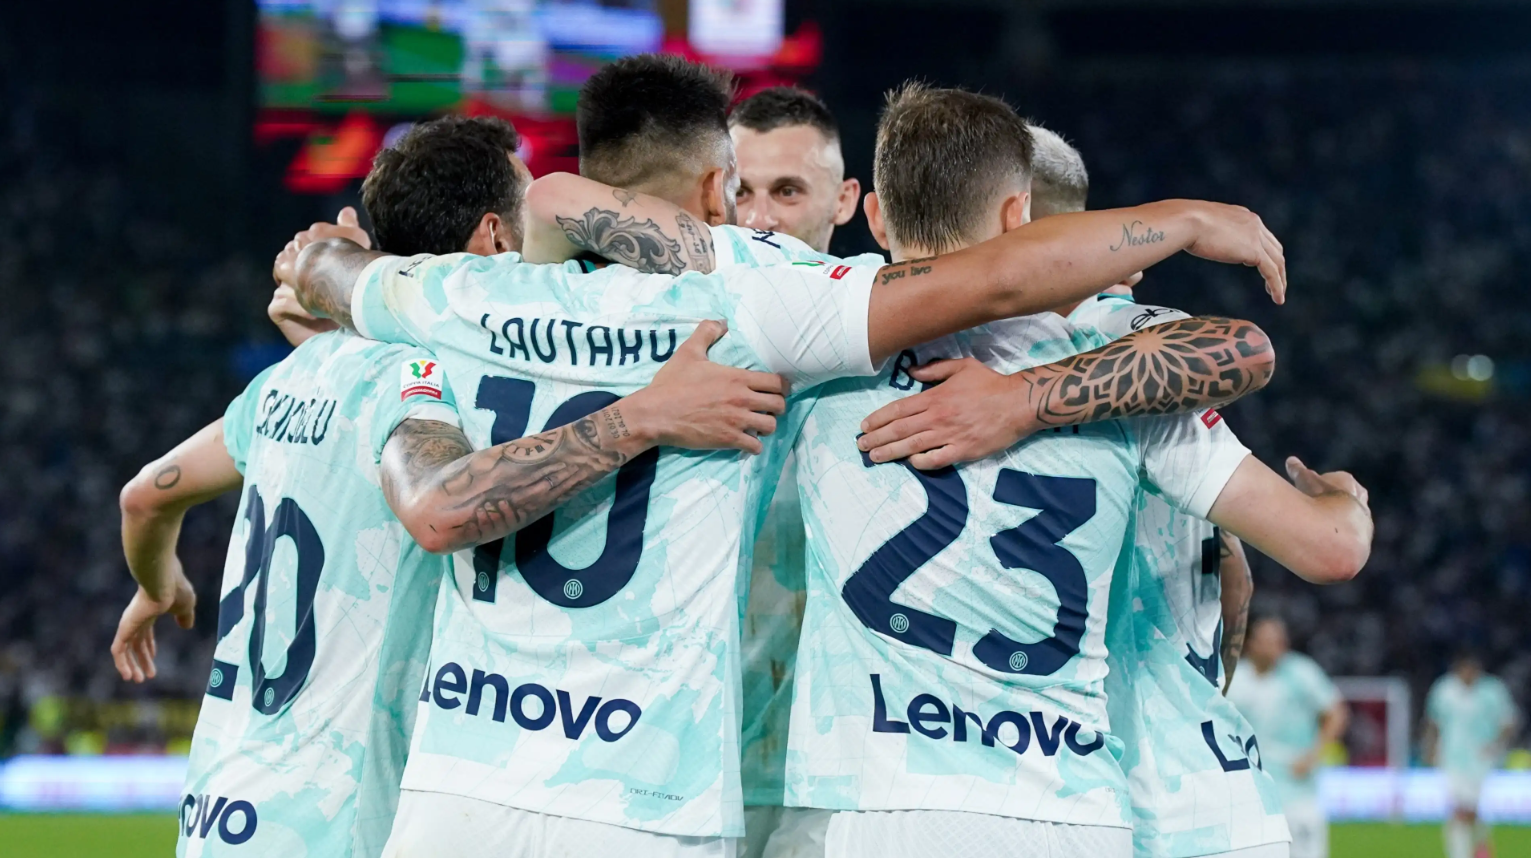 Inter's bizarre season experienced a new high on Wednesday night as a brace from Lautaro Martinez helped them beat Fiorentina in the Coppa Italia Final